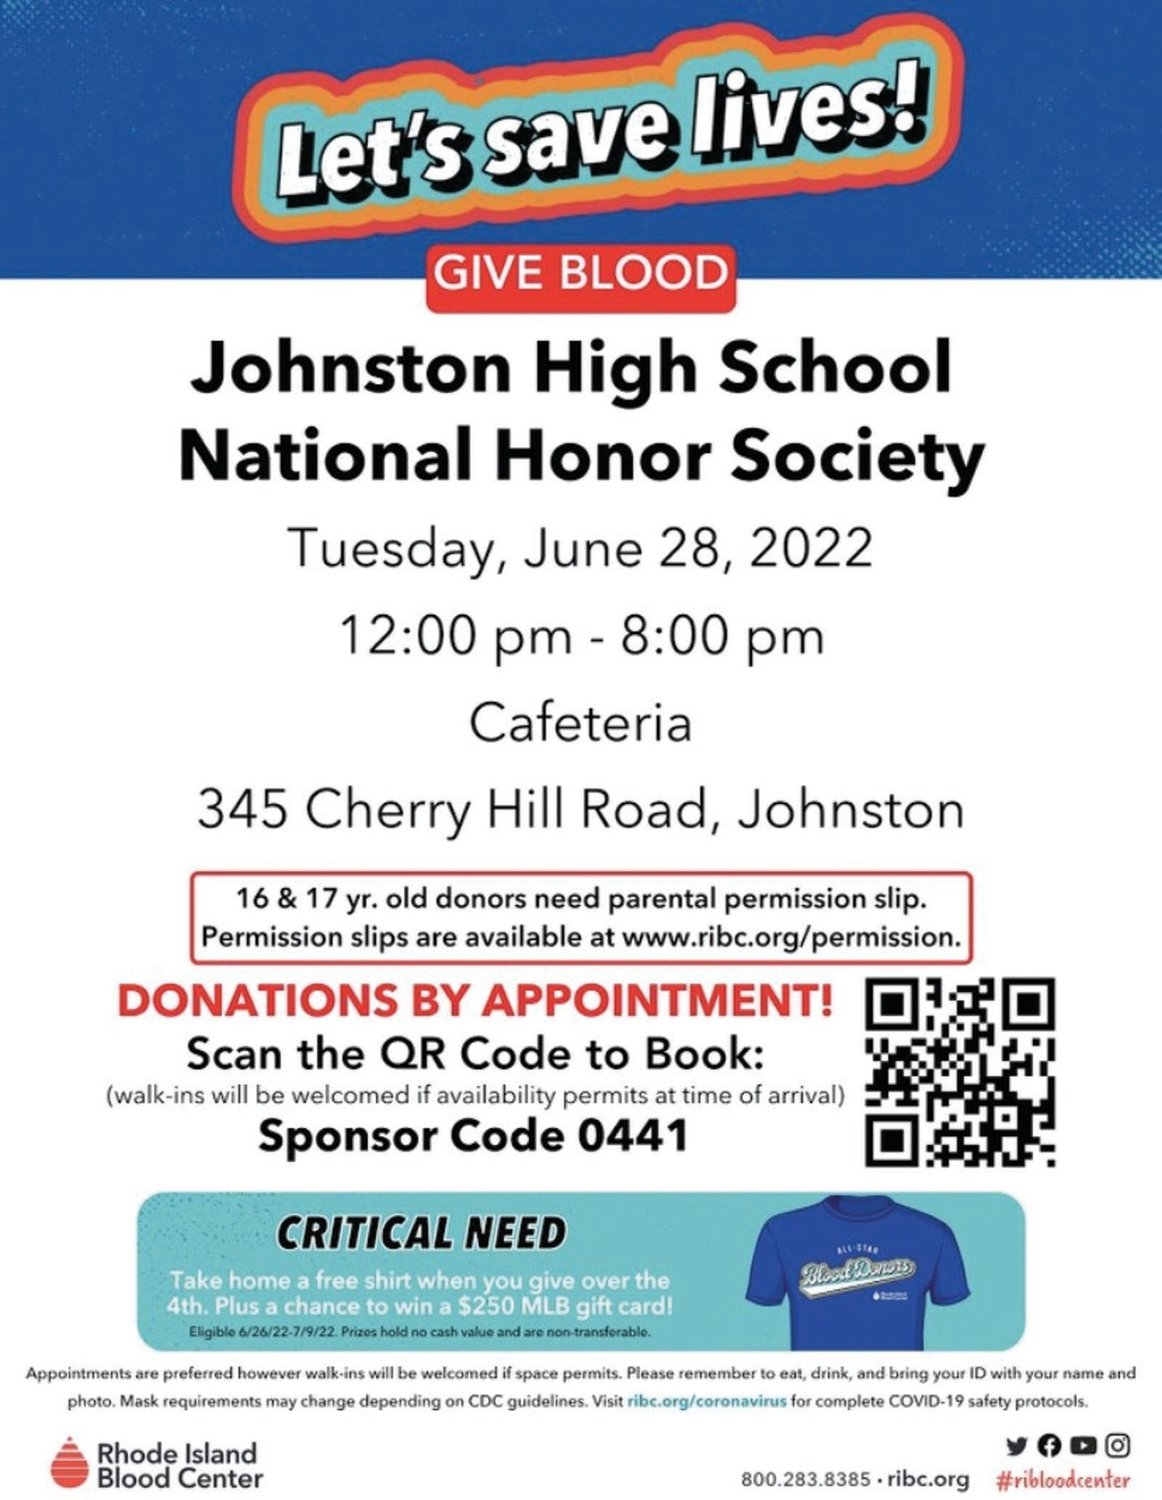 Johnston Senior High School is hosting its annual summer blood drive on June 28, from 12 p.m. to 8 p.m. The blood drive will take place in the school’s cafeteria. Our region is currently in a blood emergency and the Rhode Island Blood Center (RIBC) is in need of people willing to donate.